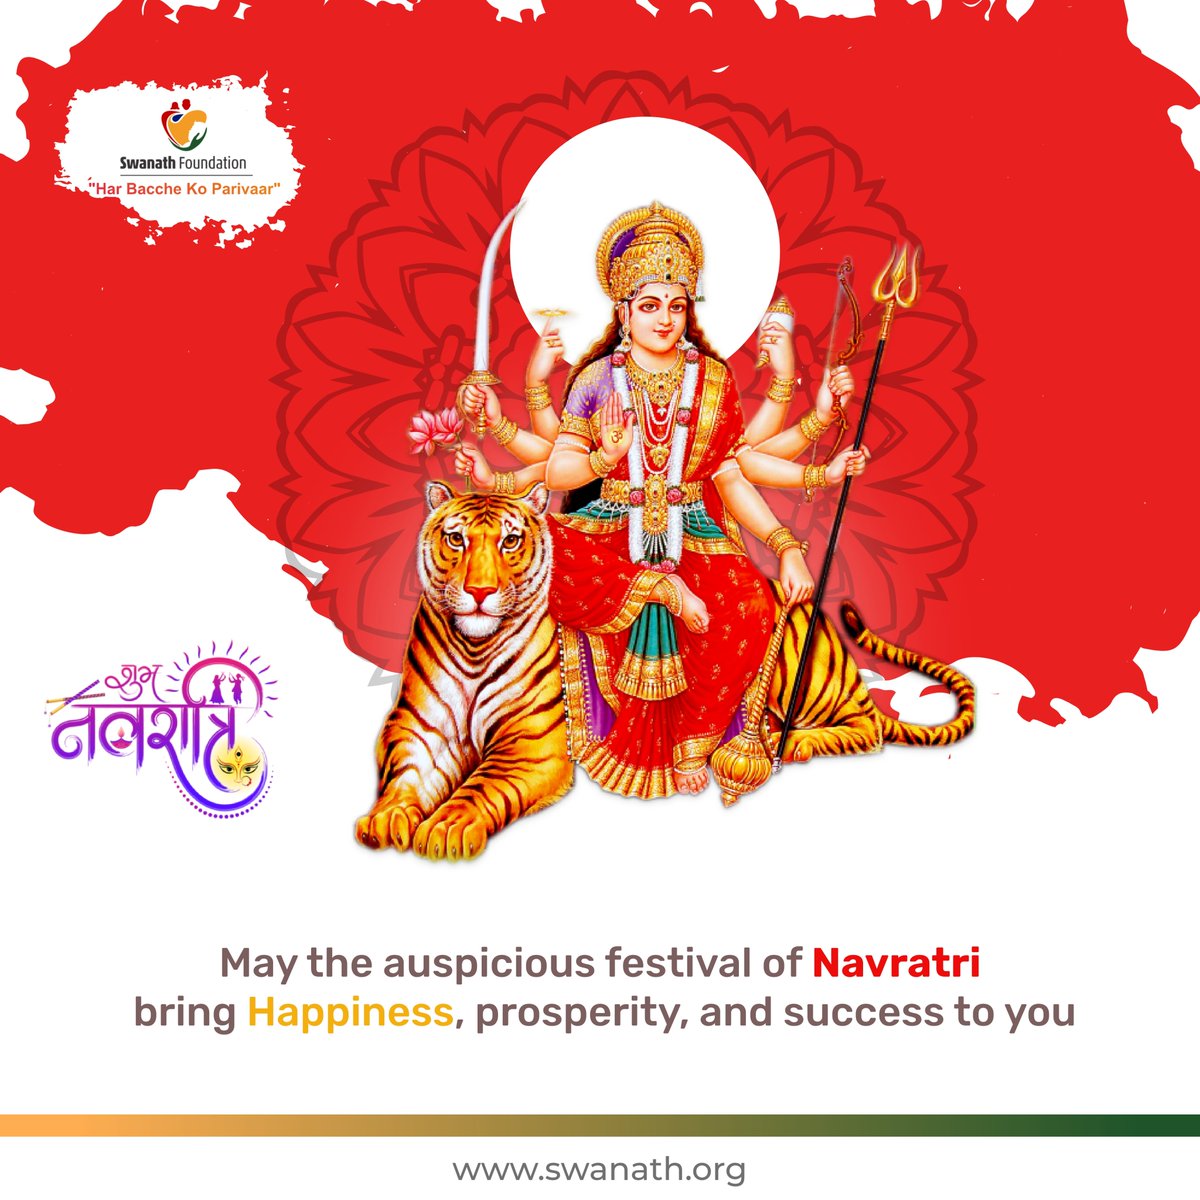 'Wishing you all the prosperity and joy this Navratri. Let's come together to create a brighter future for every orphaned child with Swanath Foundation. #ProsperityForAll #NavratriVibes'